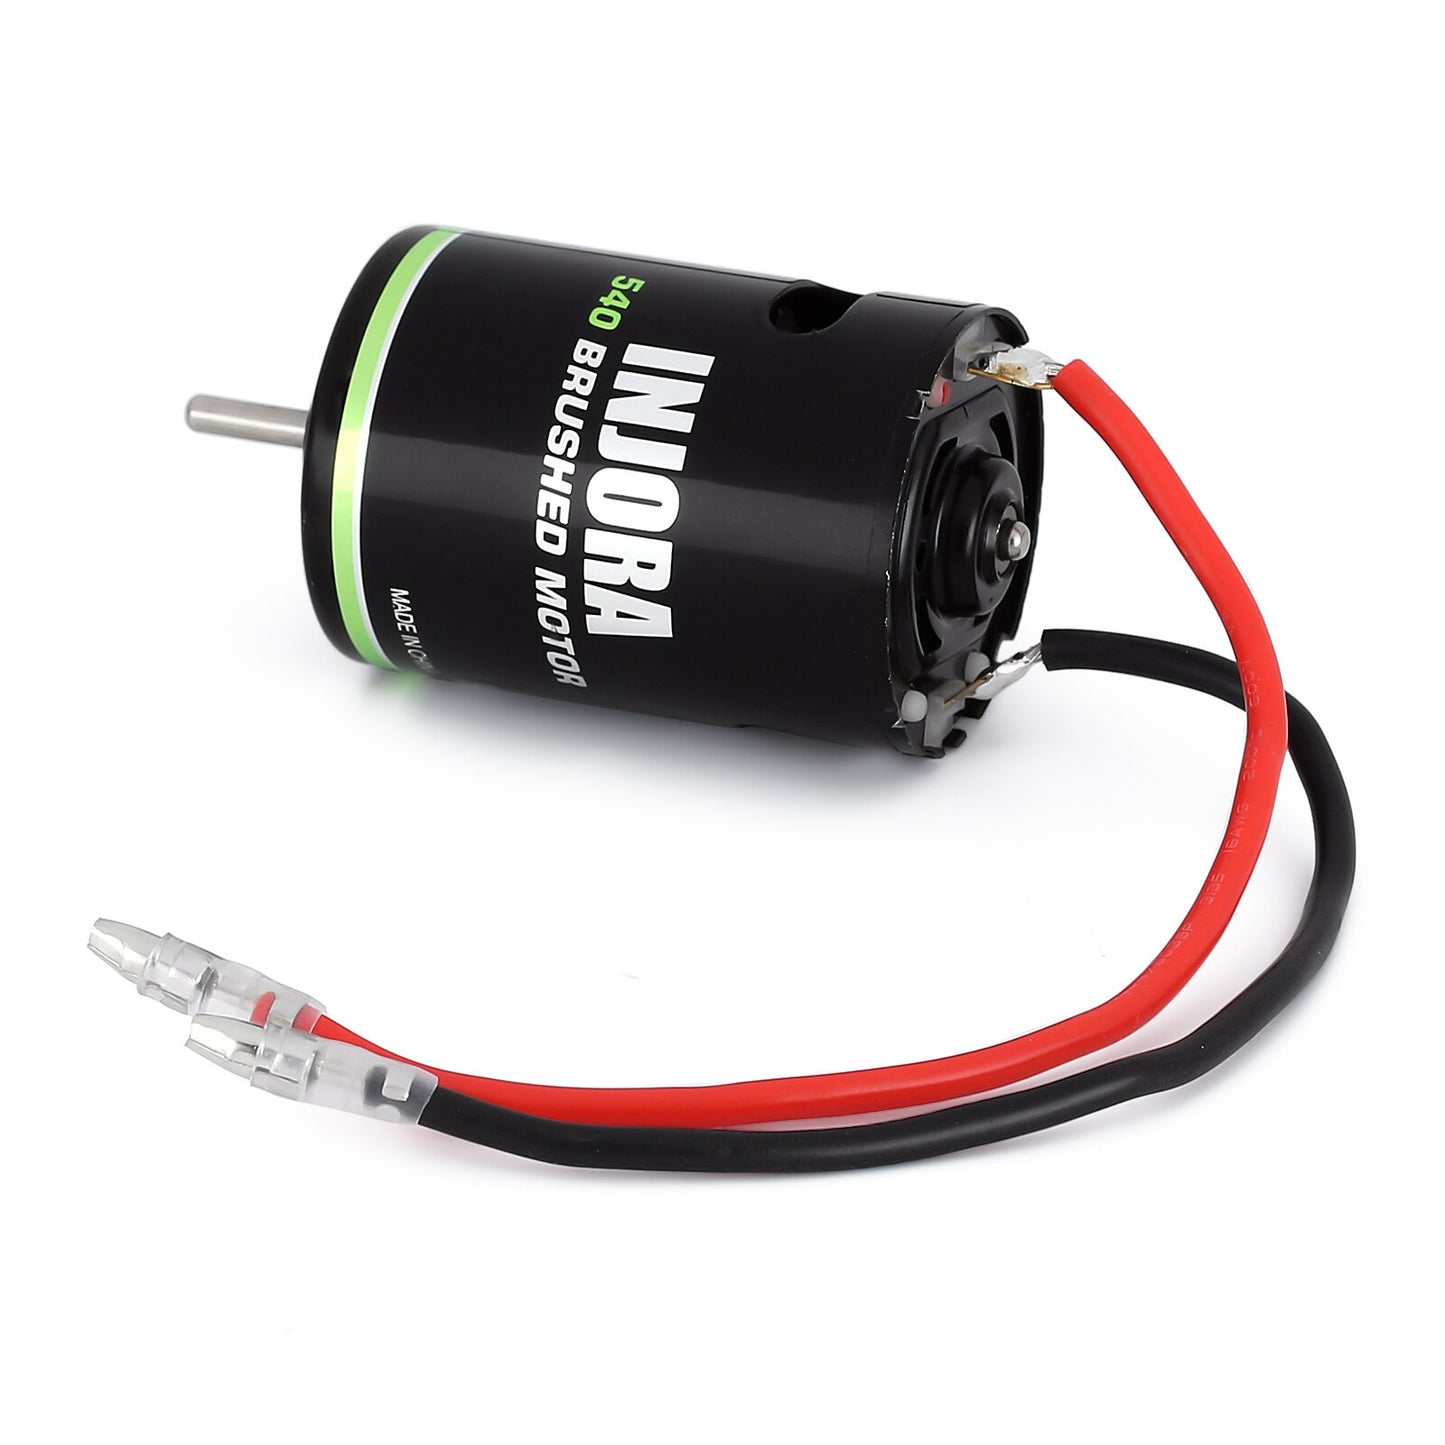 INJORA 20T 27T 35T 45T 540 Brushed Motor Waterproof for 1:10 RC Crawler Axial SCX10 AXI03007 90046 TRX4 Car Boat Parts